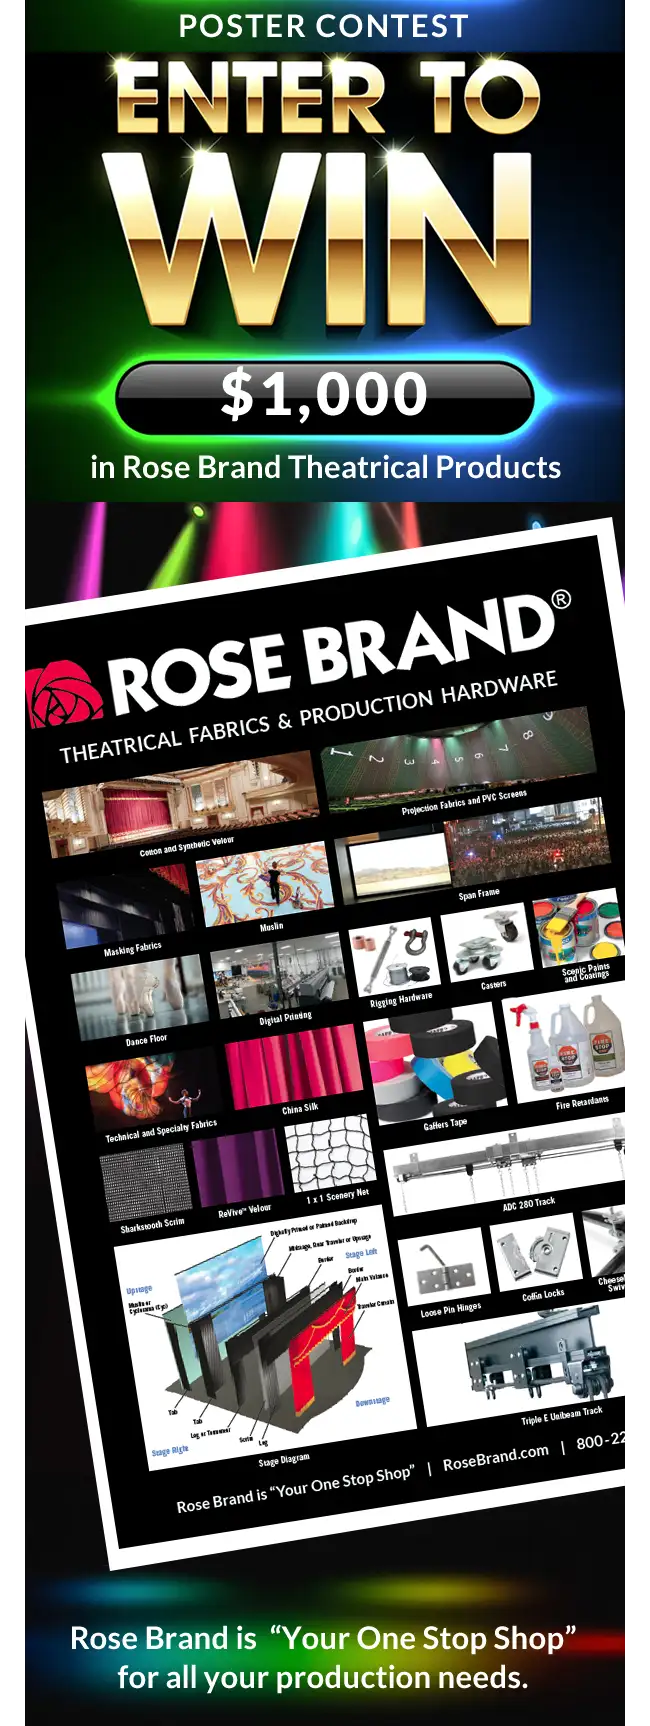 How to WIN the $1,000 in Rose Brand® Theatrical Products